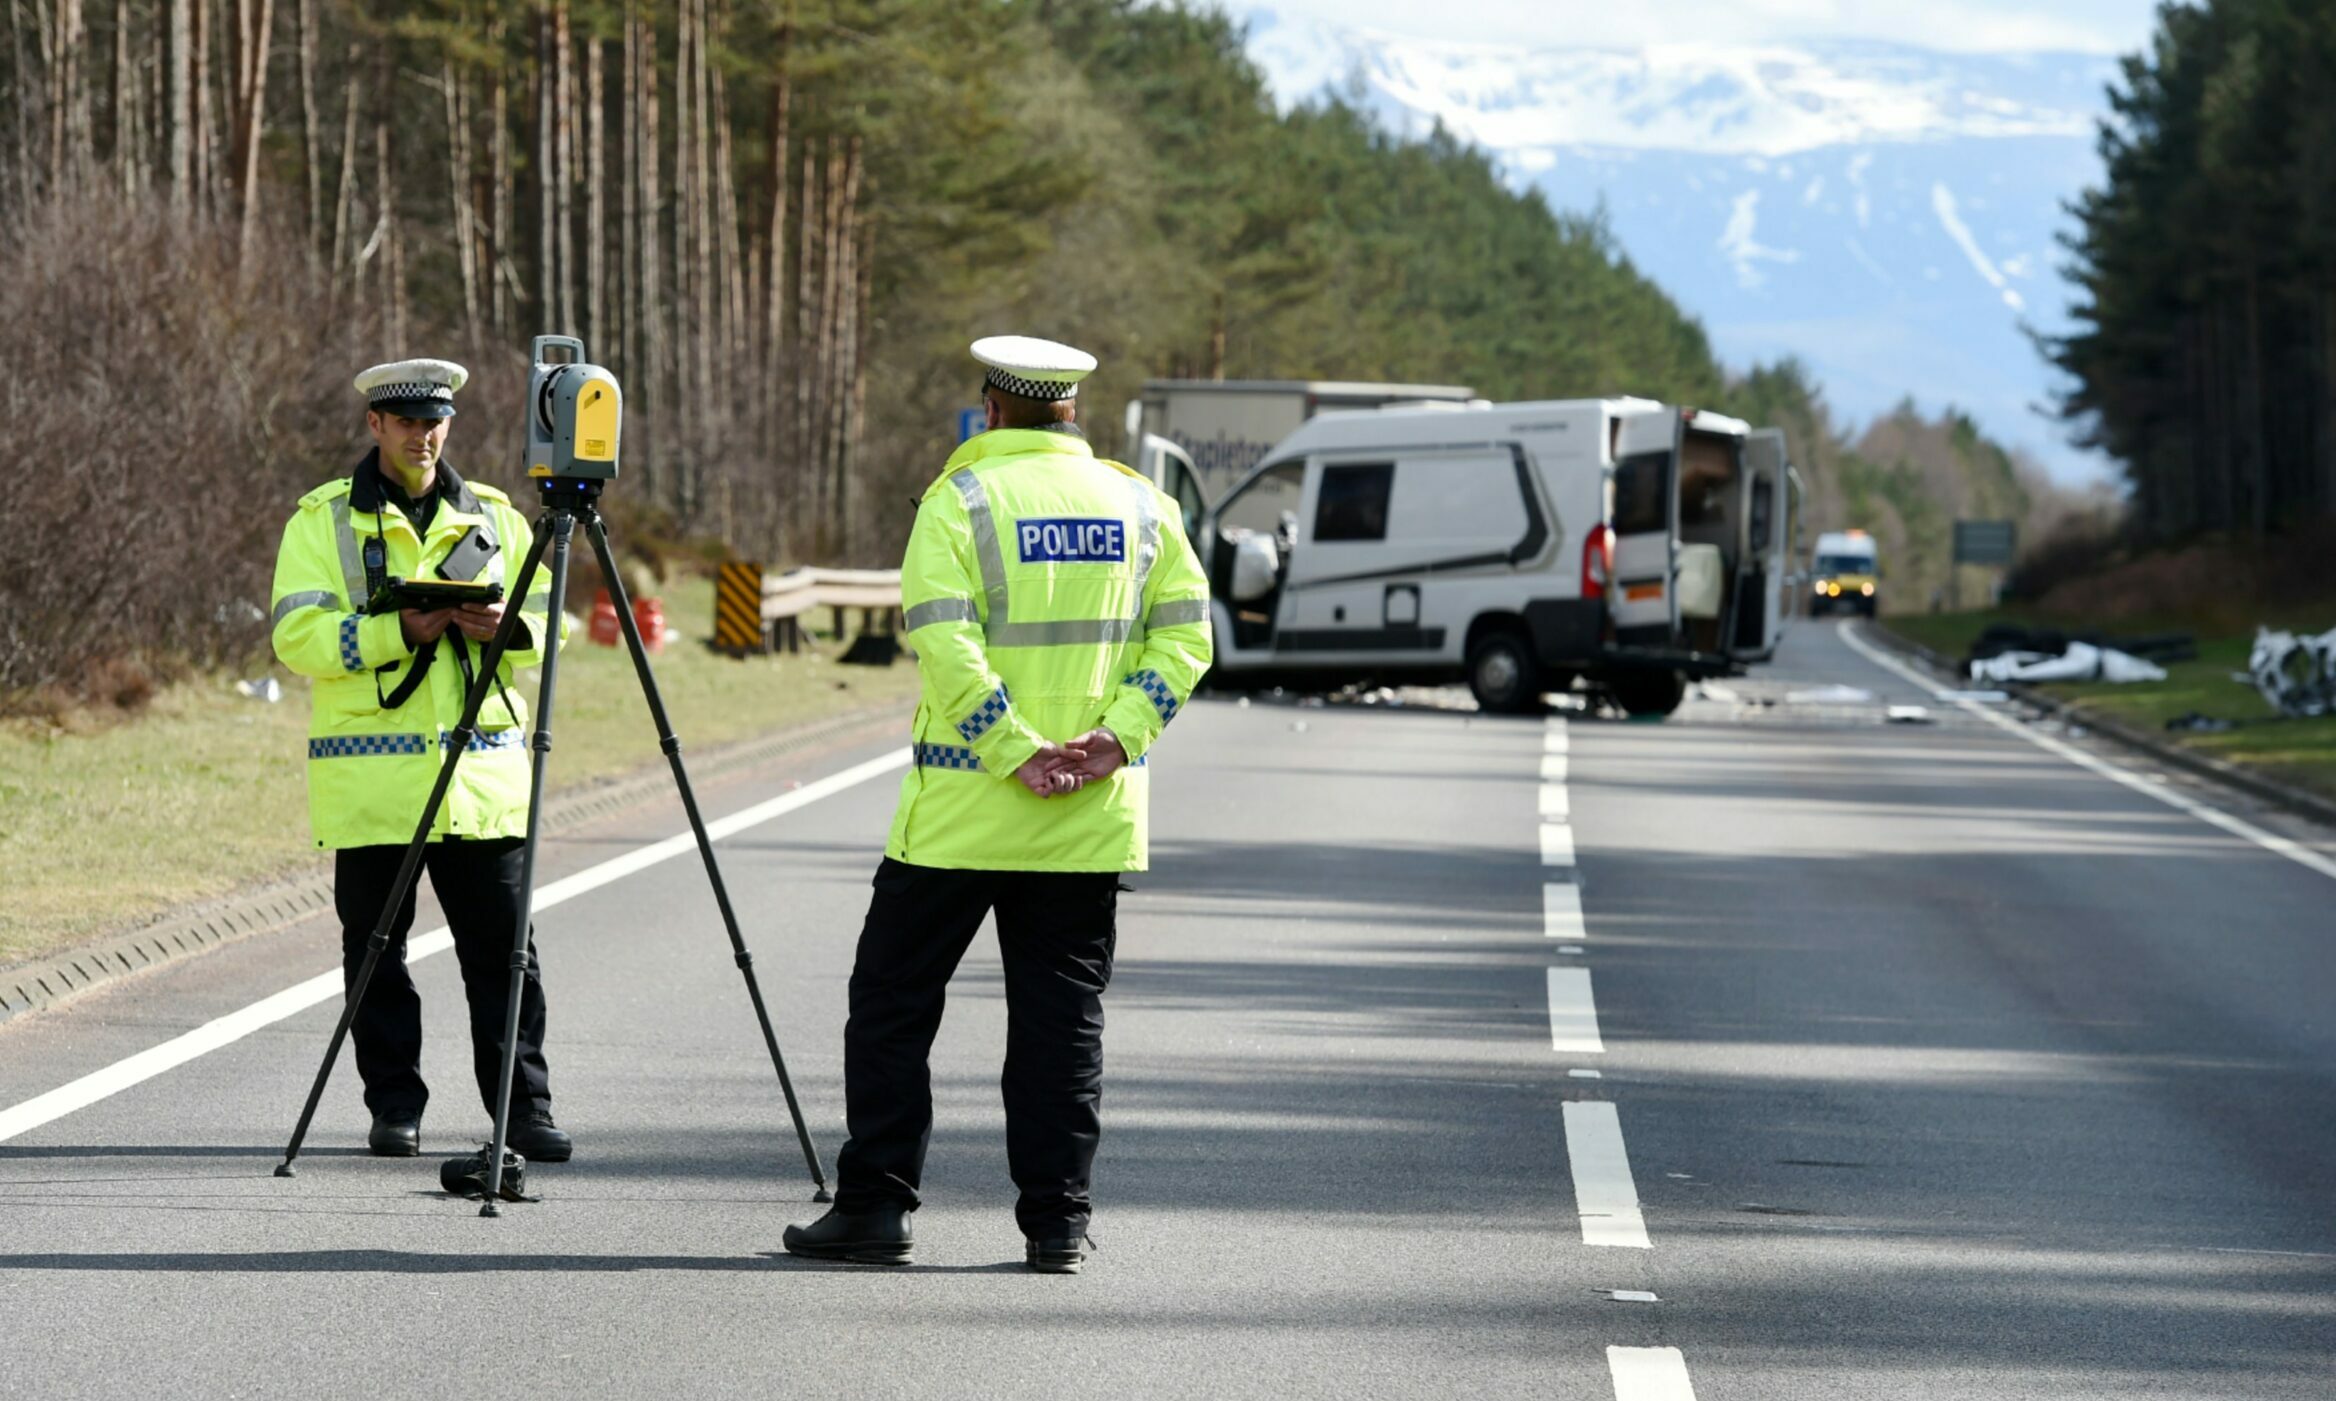 'Residents want action, not excuses': Murdo Fraser MSP calls for A9 dualling to be prioritised after 12th death on road this year